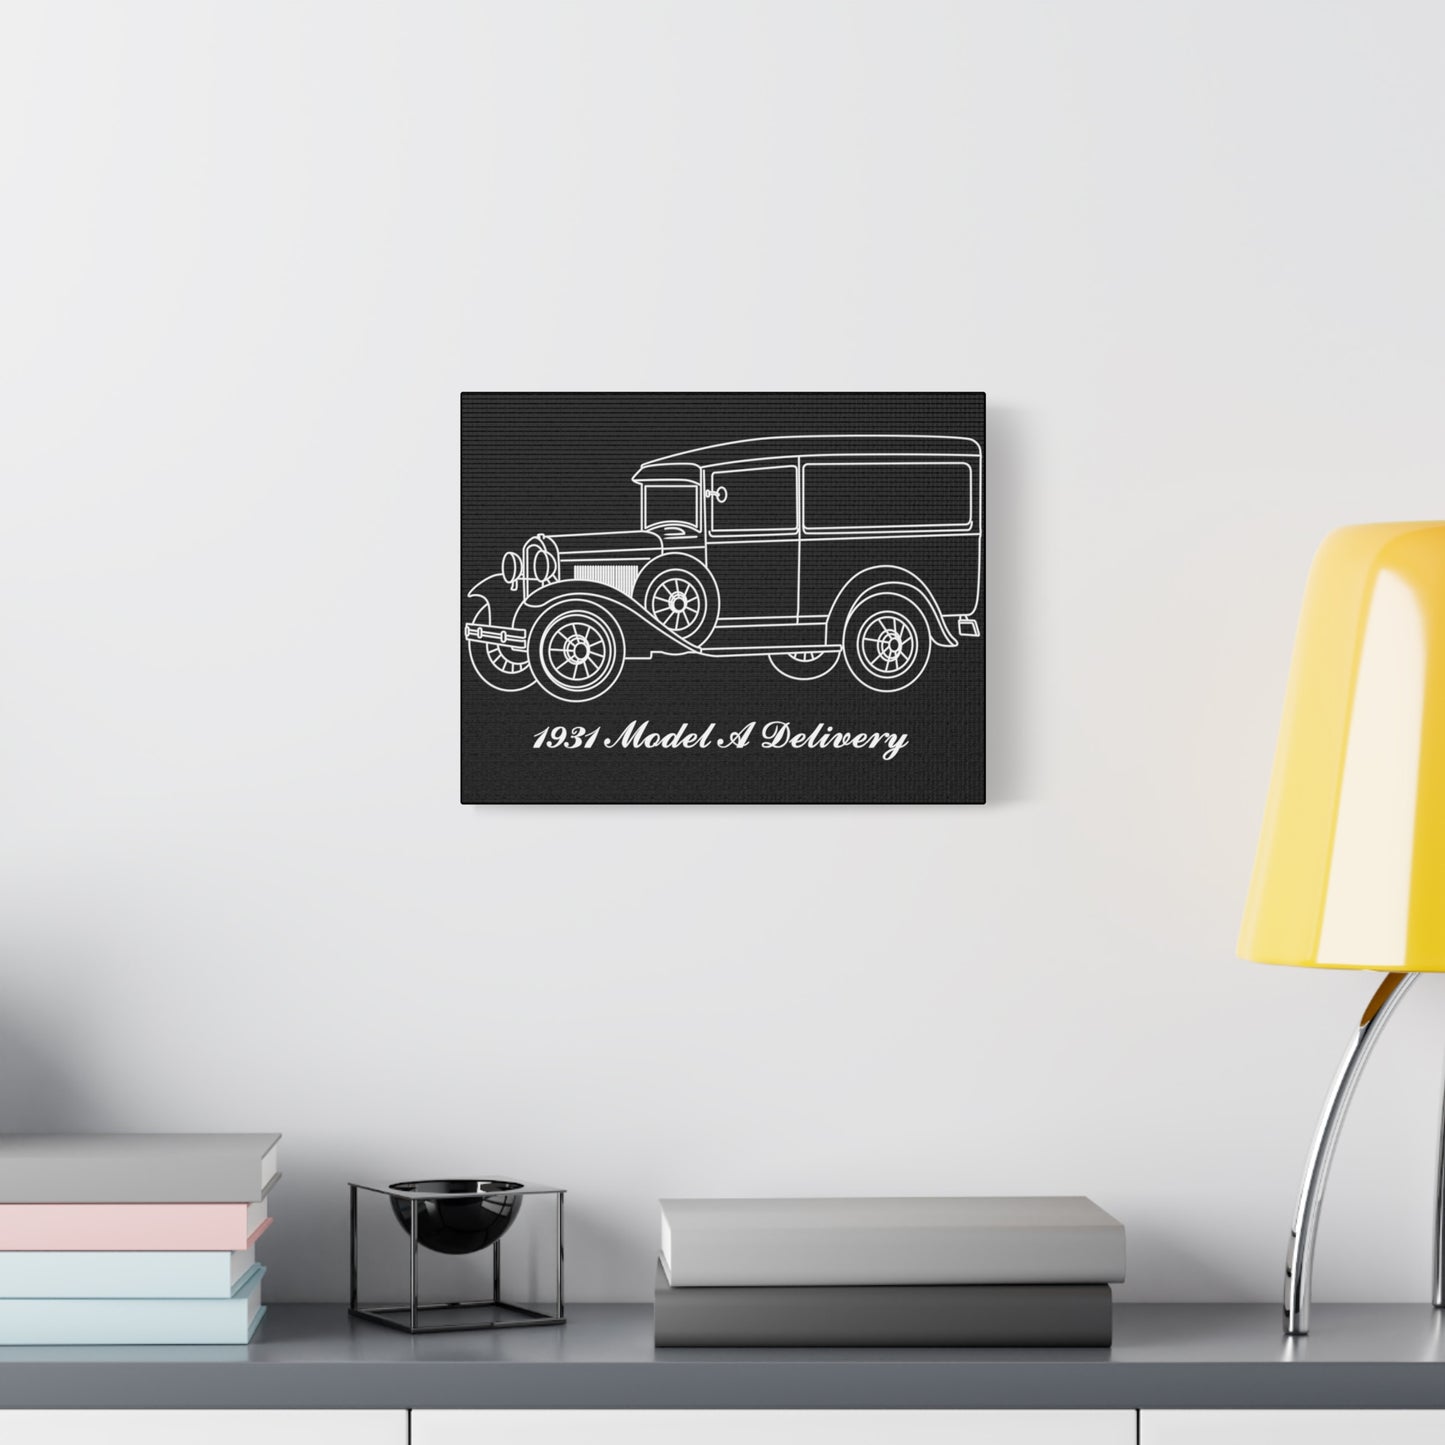 1931 Delivery Black Canvas Wall Art